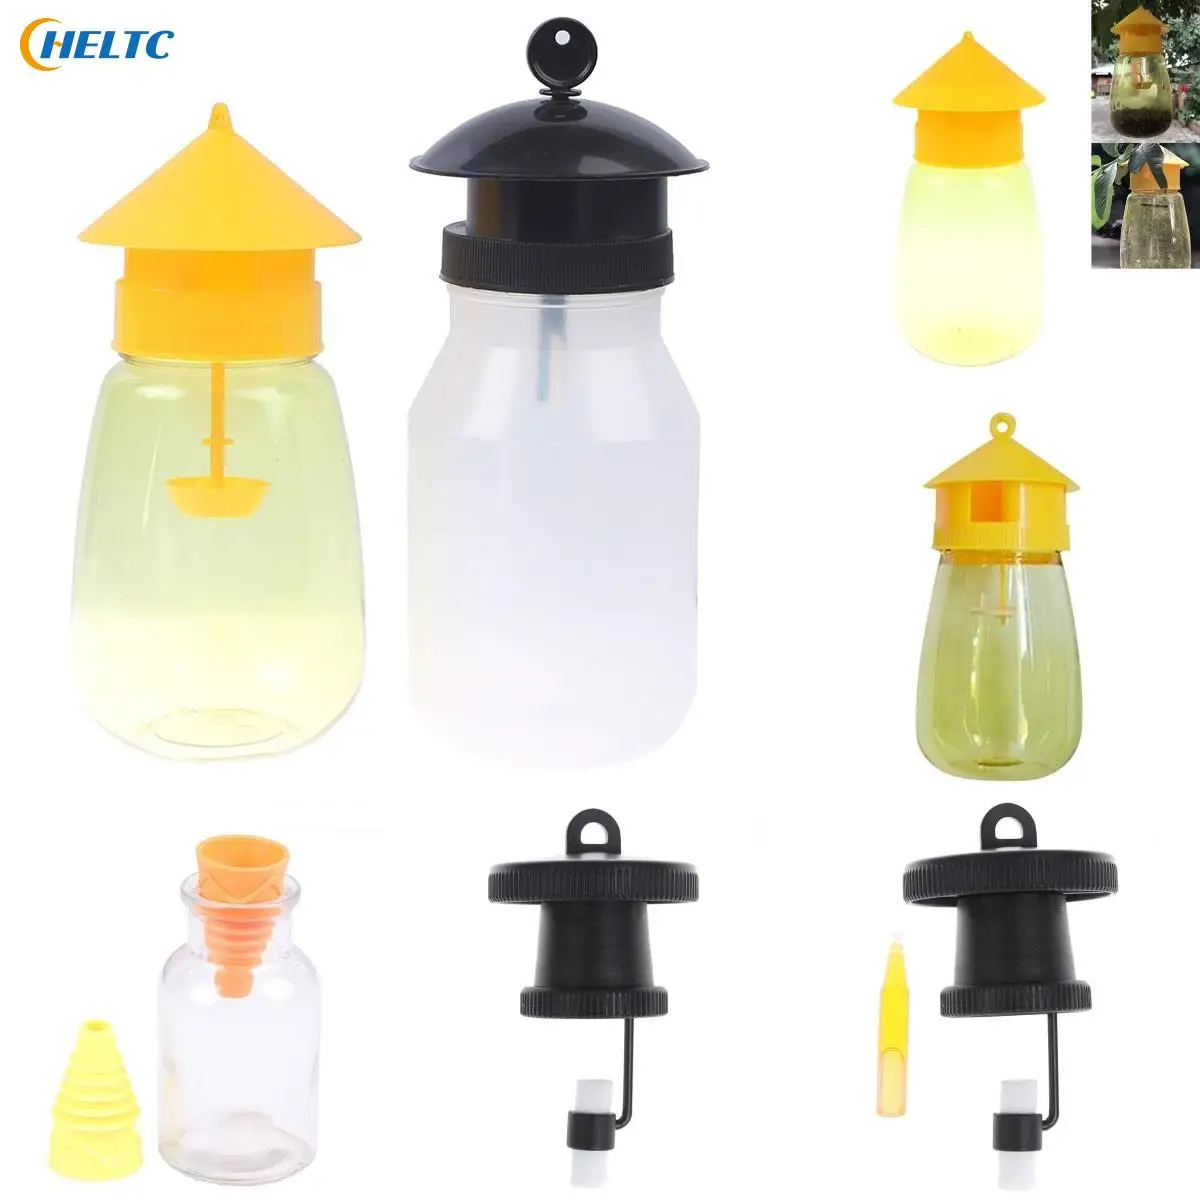 

1PCS Wasp Trap Fruit Fly Mosquitos Flies Insect Bug Hanging Honey-Trap Catcher Killer No-Poison Hanging Tree Pest Control Tool